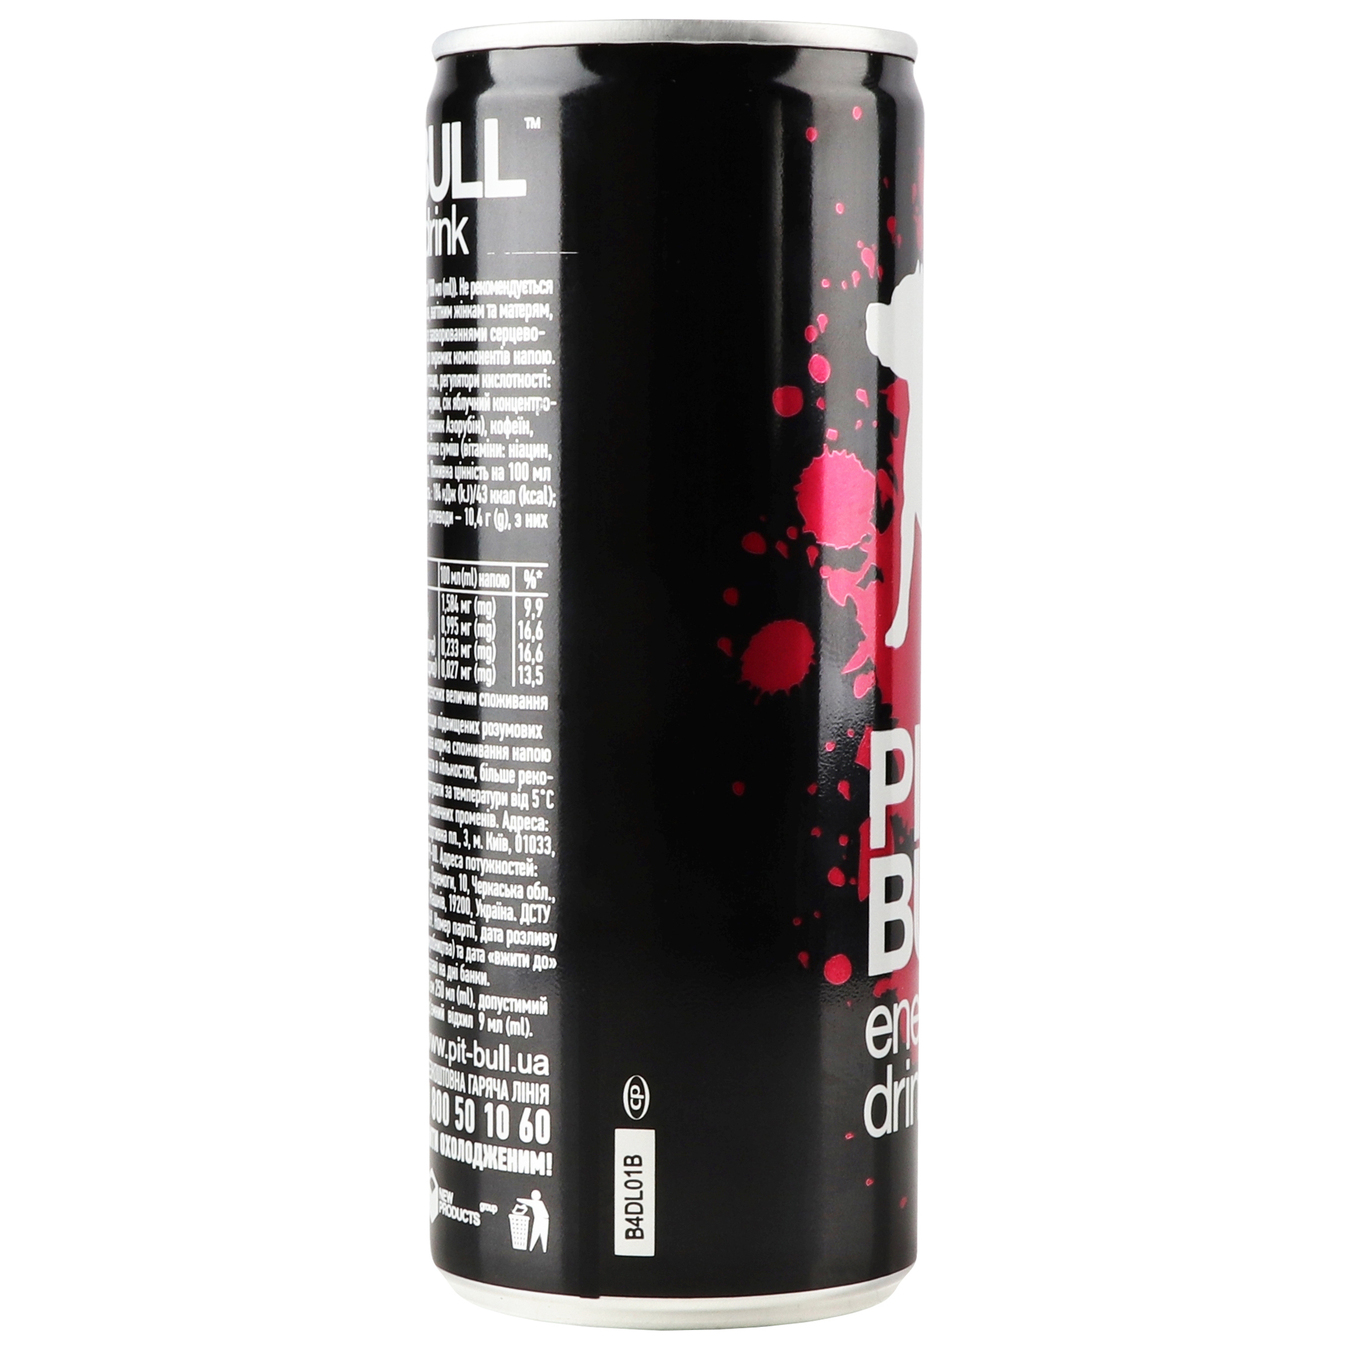 Pit Bull energy drink 0.25 l iron can 3